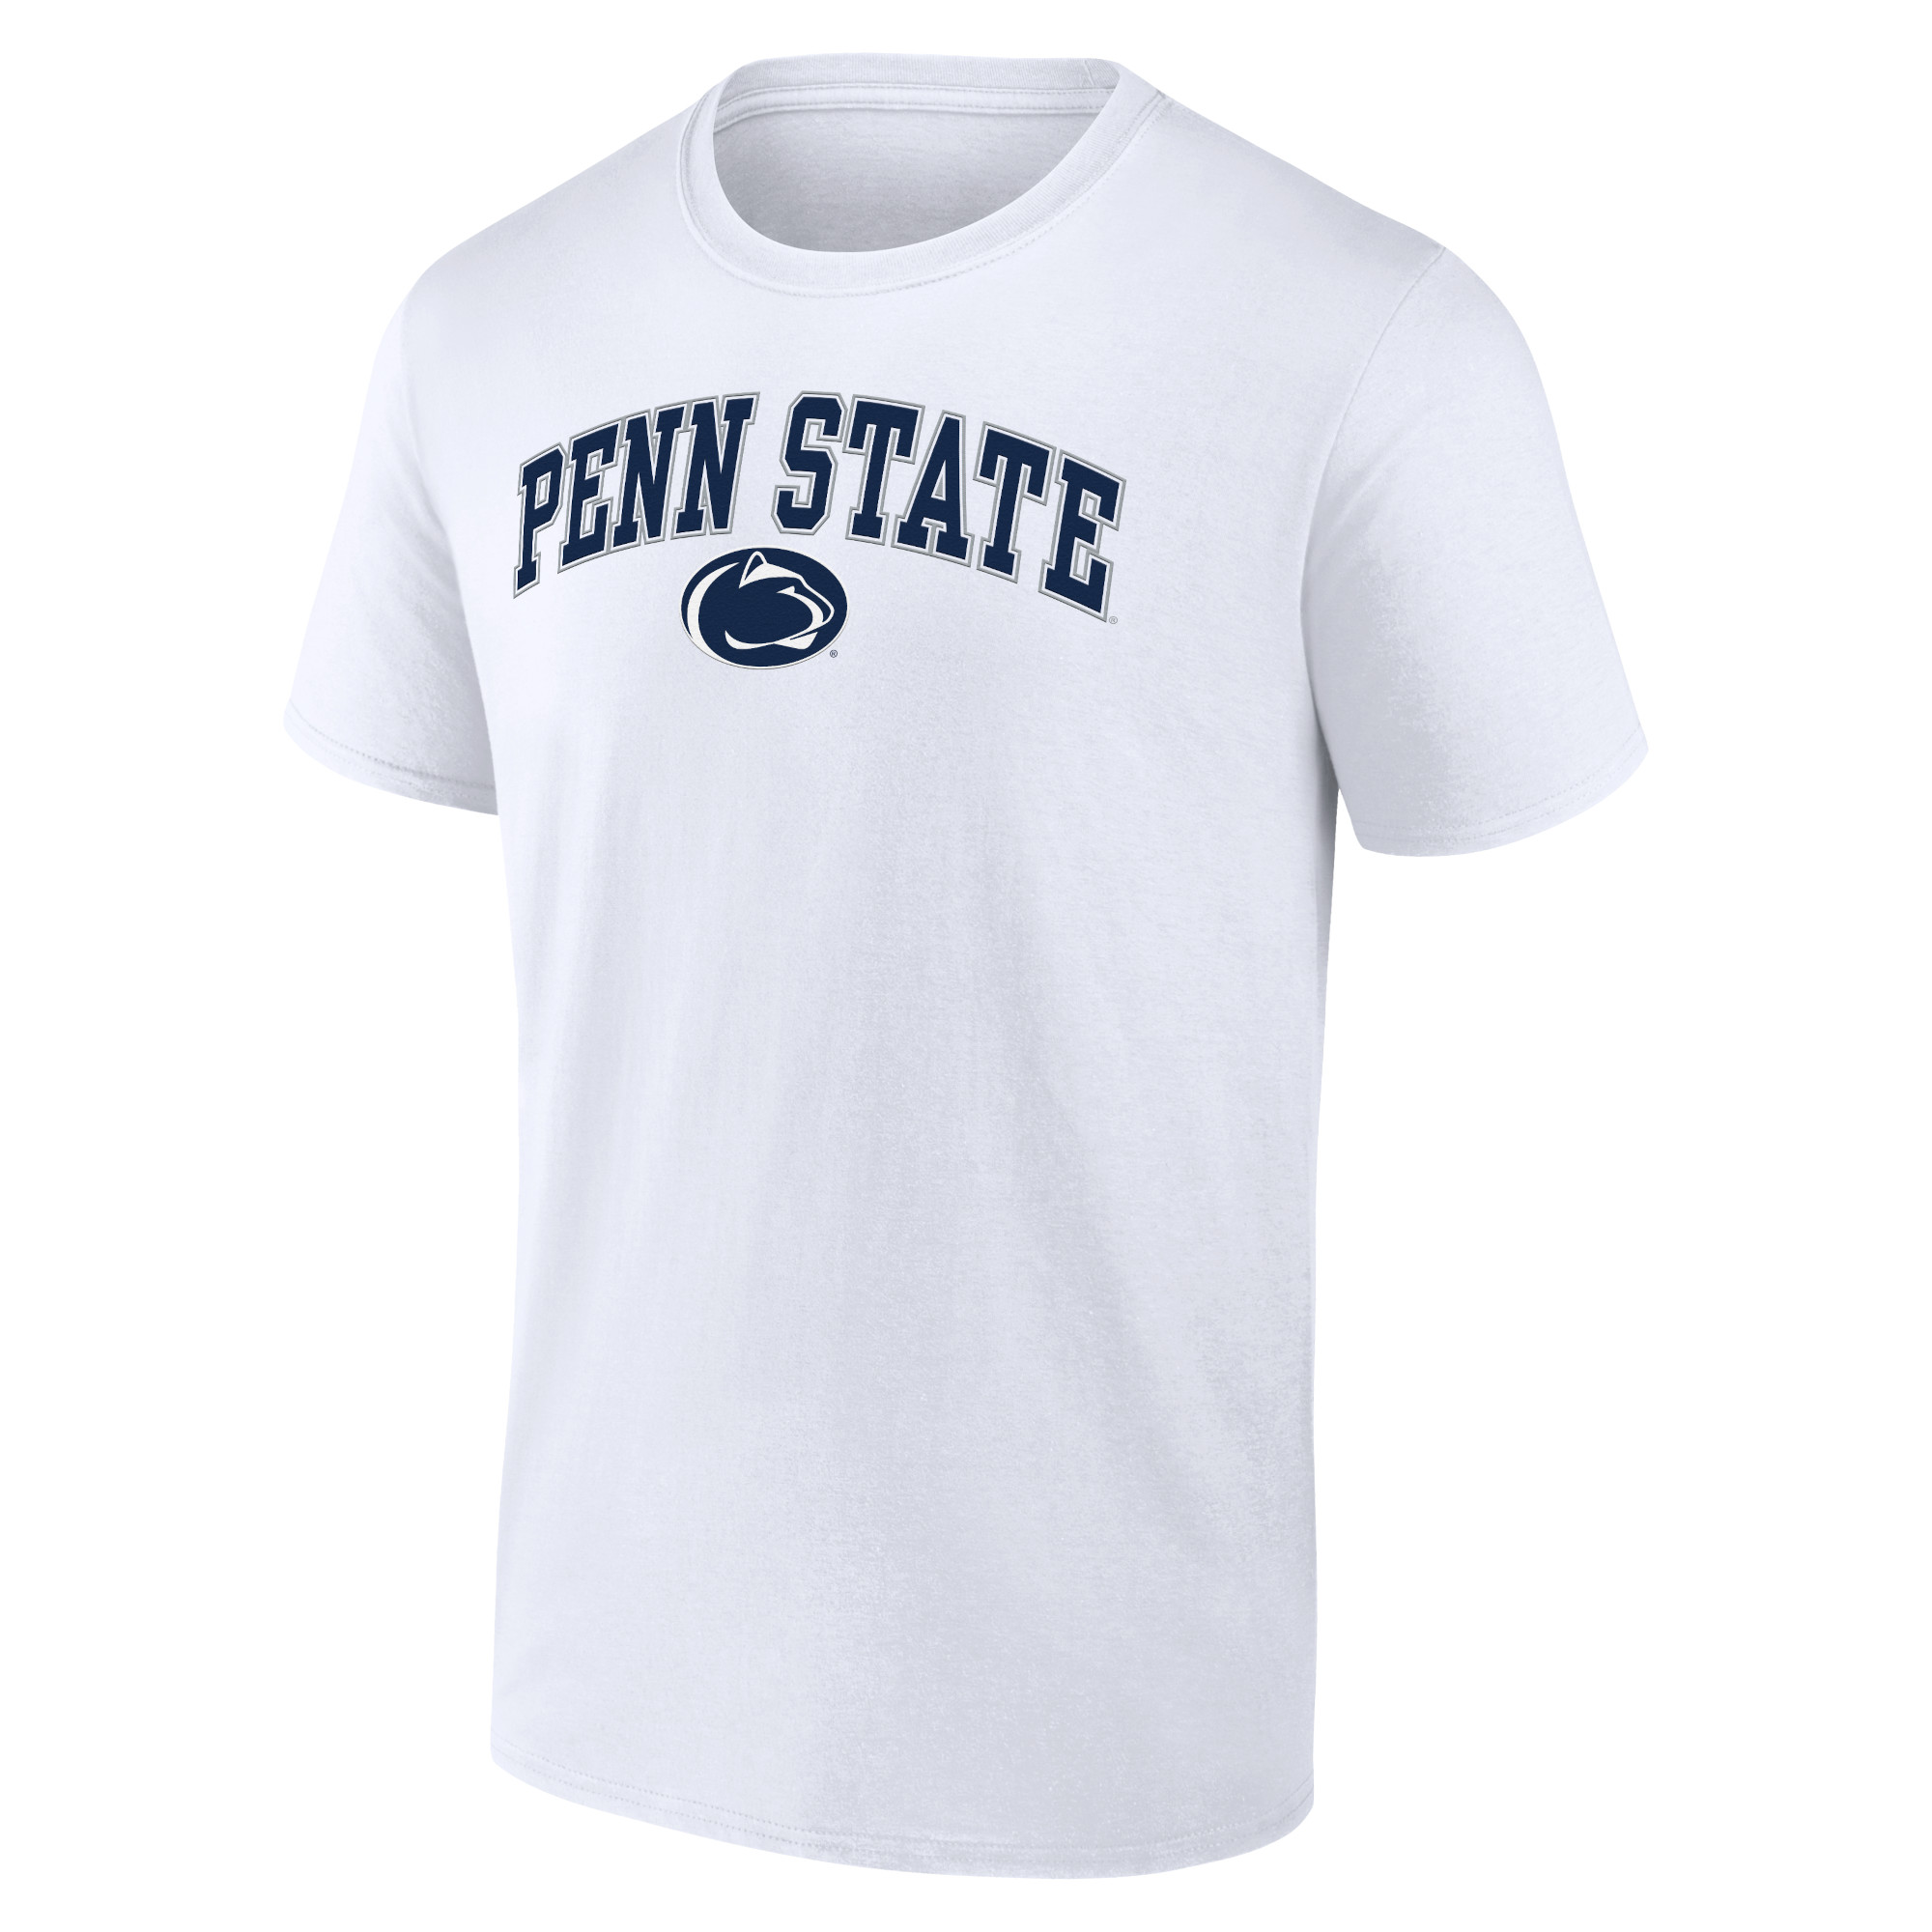 Men's Fanatics Branded White Penn State Nittany Lions Campus T-Shirt - image 2 of 3